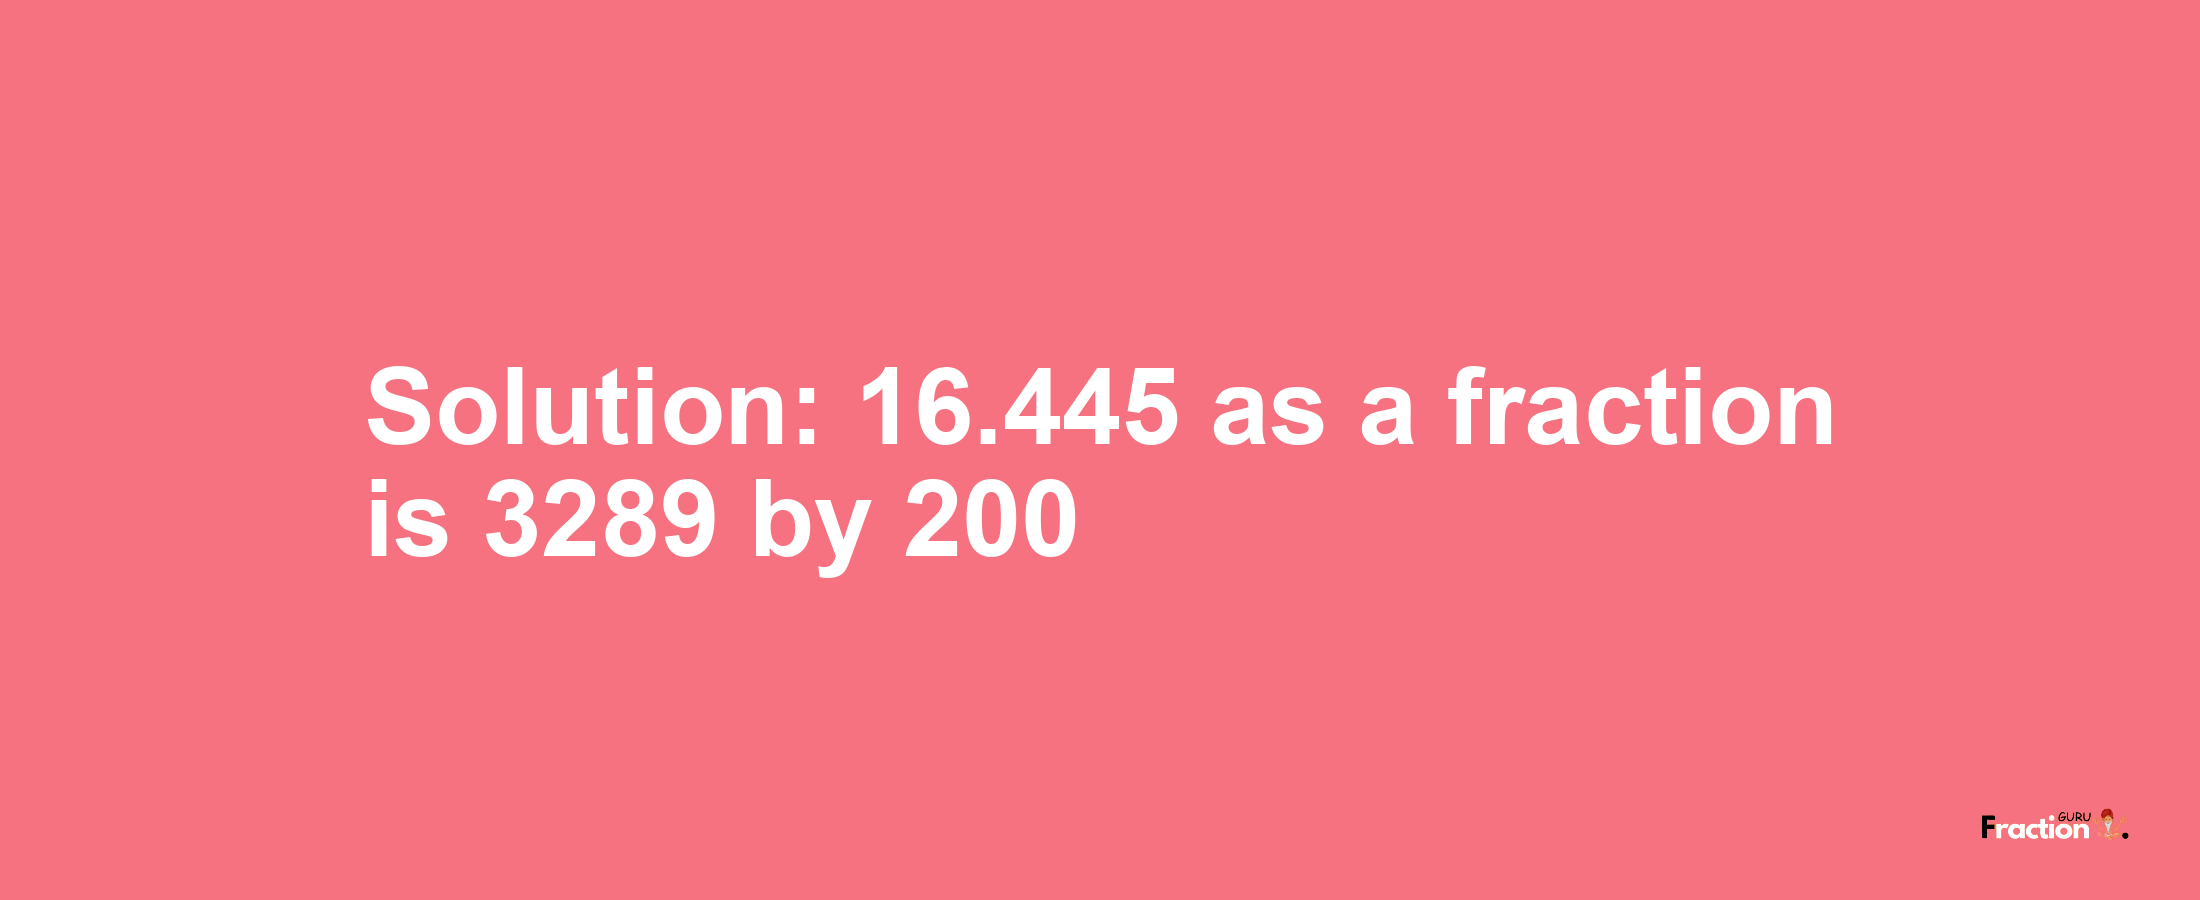 Solution:16.445 as a fraction is 3289/200